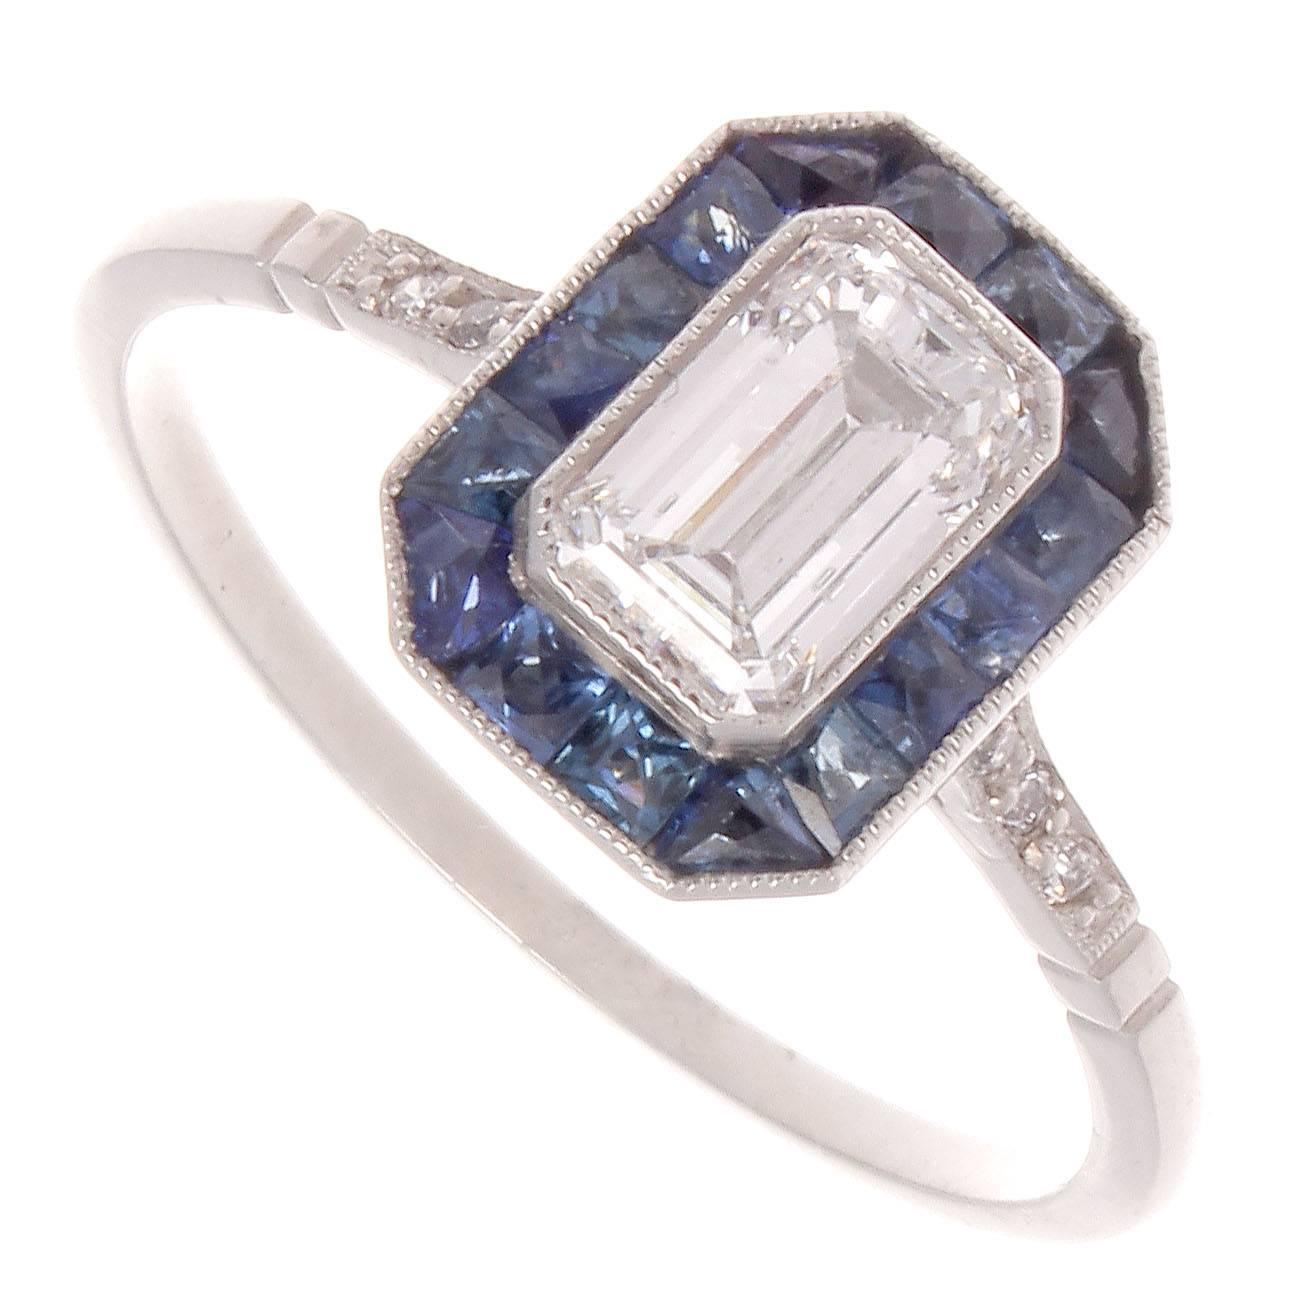 A special hand made ring for that special someone. Featuring a 0.68 carat emerald cut diamond that is F color, SI2 clarity. Surrounded by a vibrant halo of navy blue sapphires. Crafted in platinum.

Ring size 7 and may easily be resized.